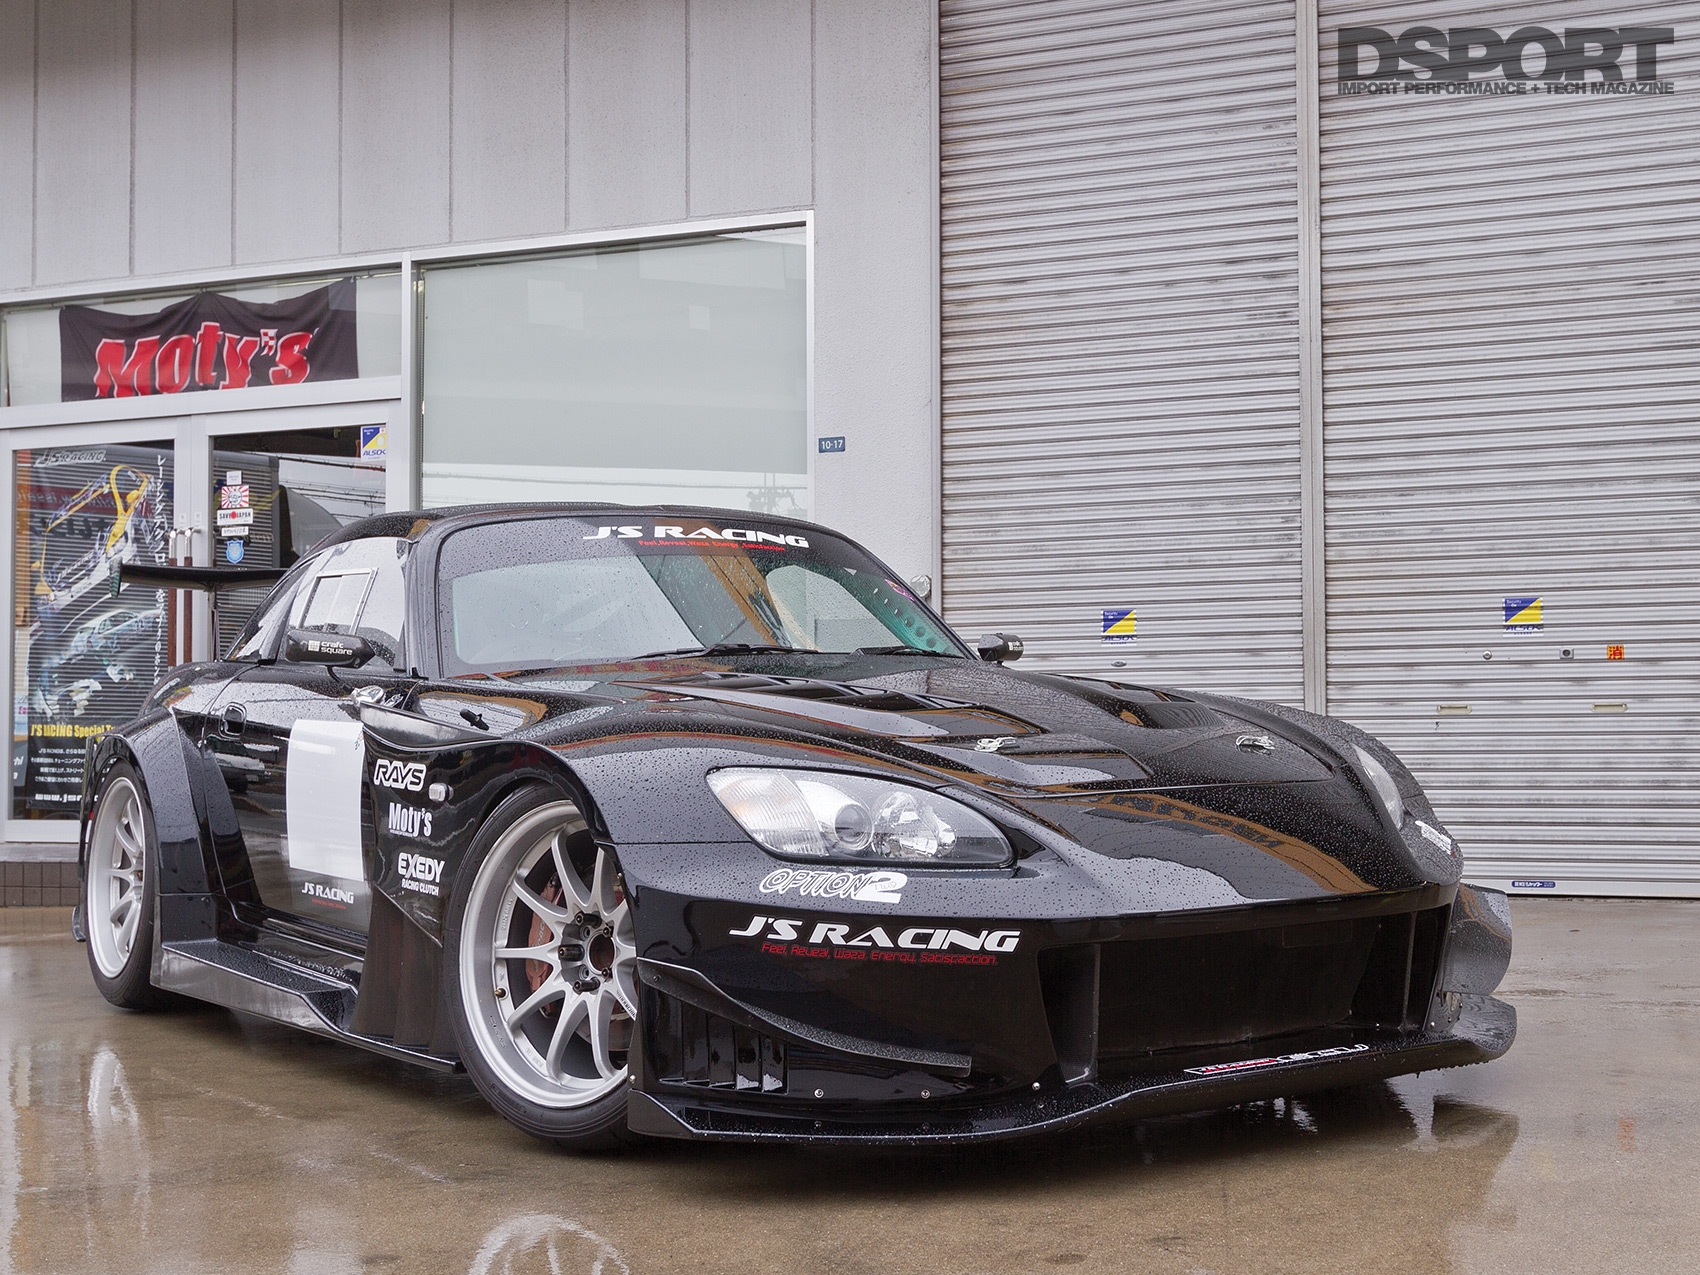 Front view of the J’s Racing S2000.